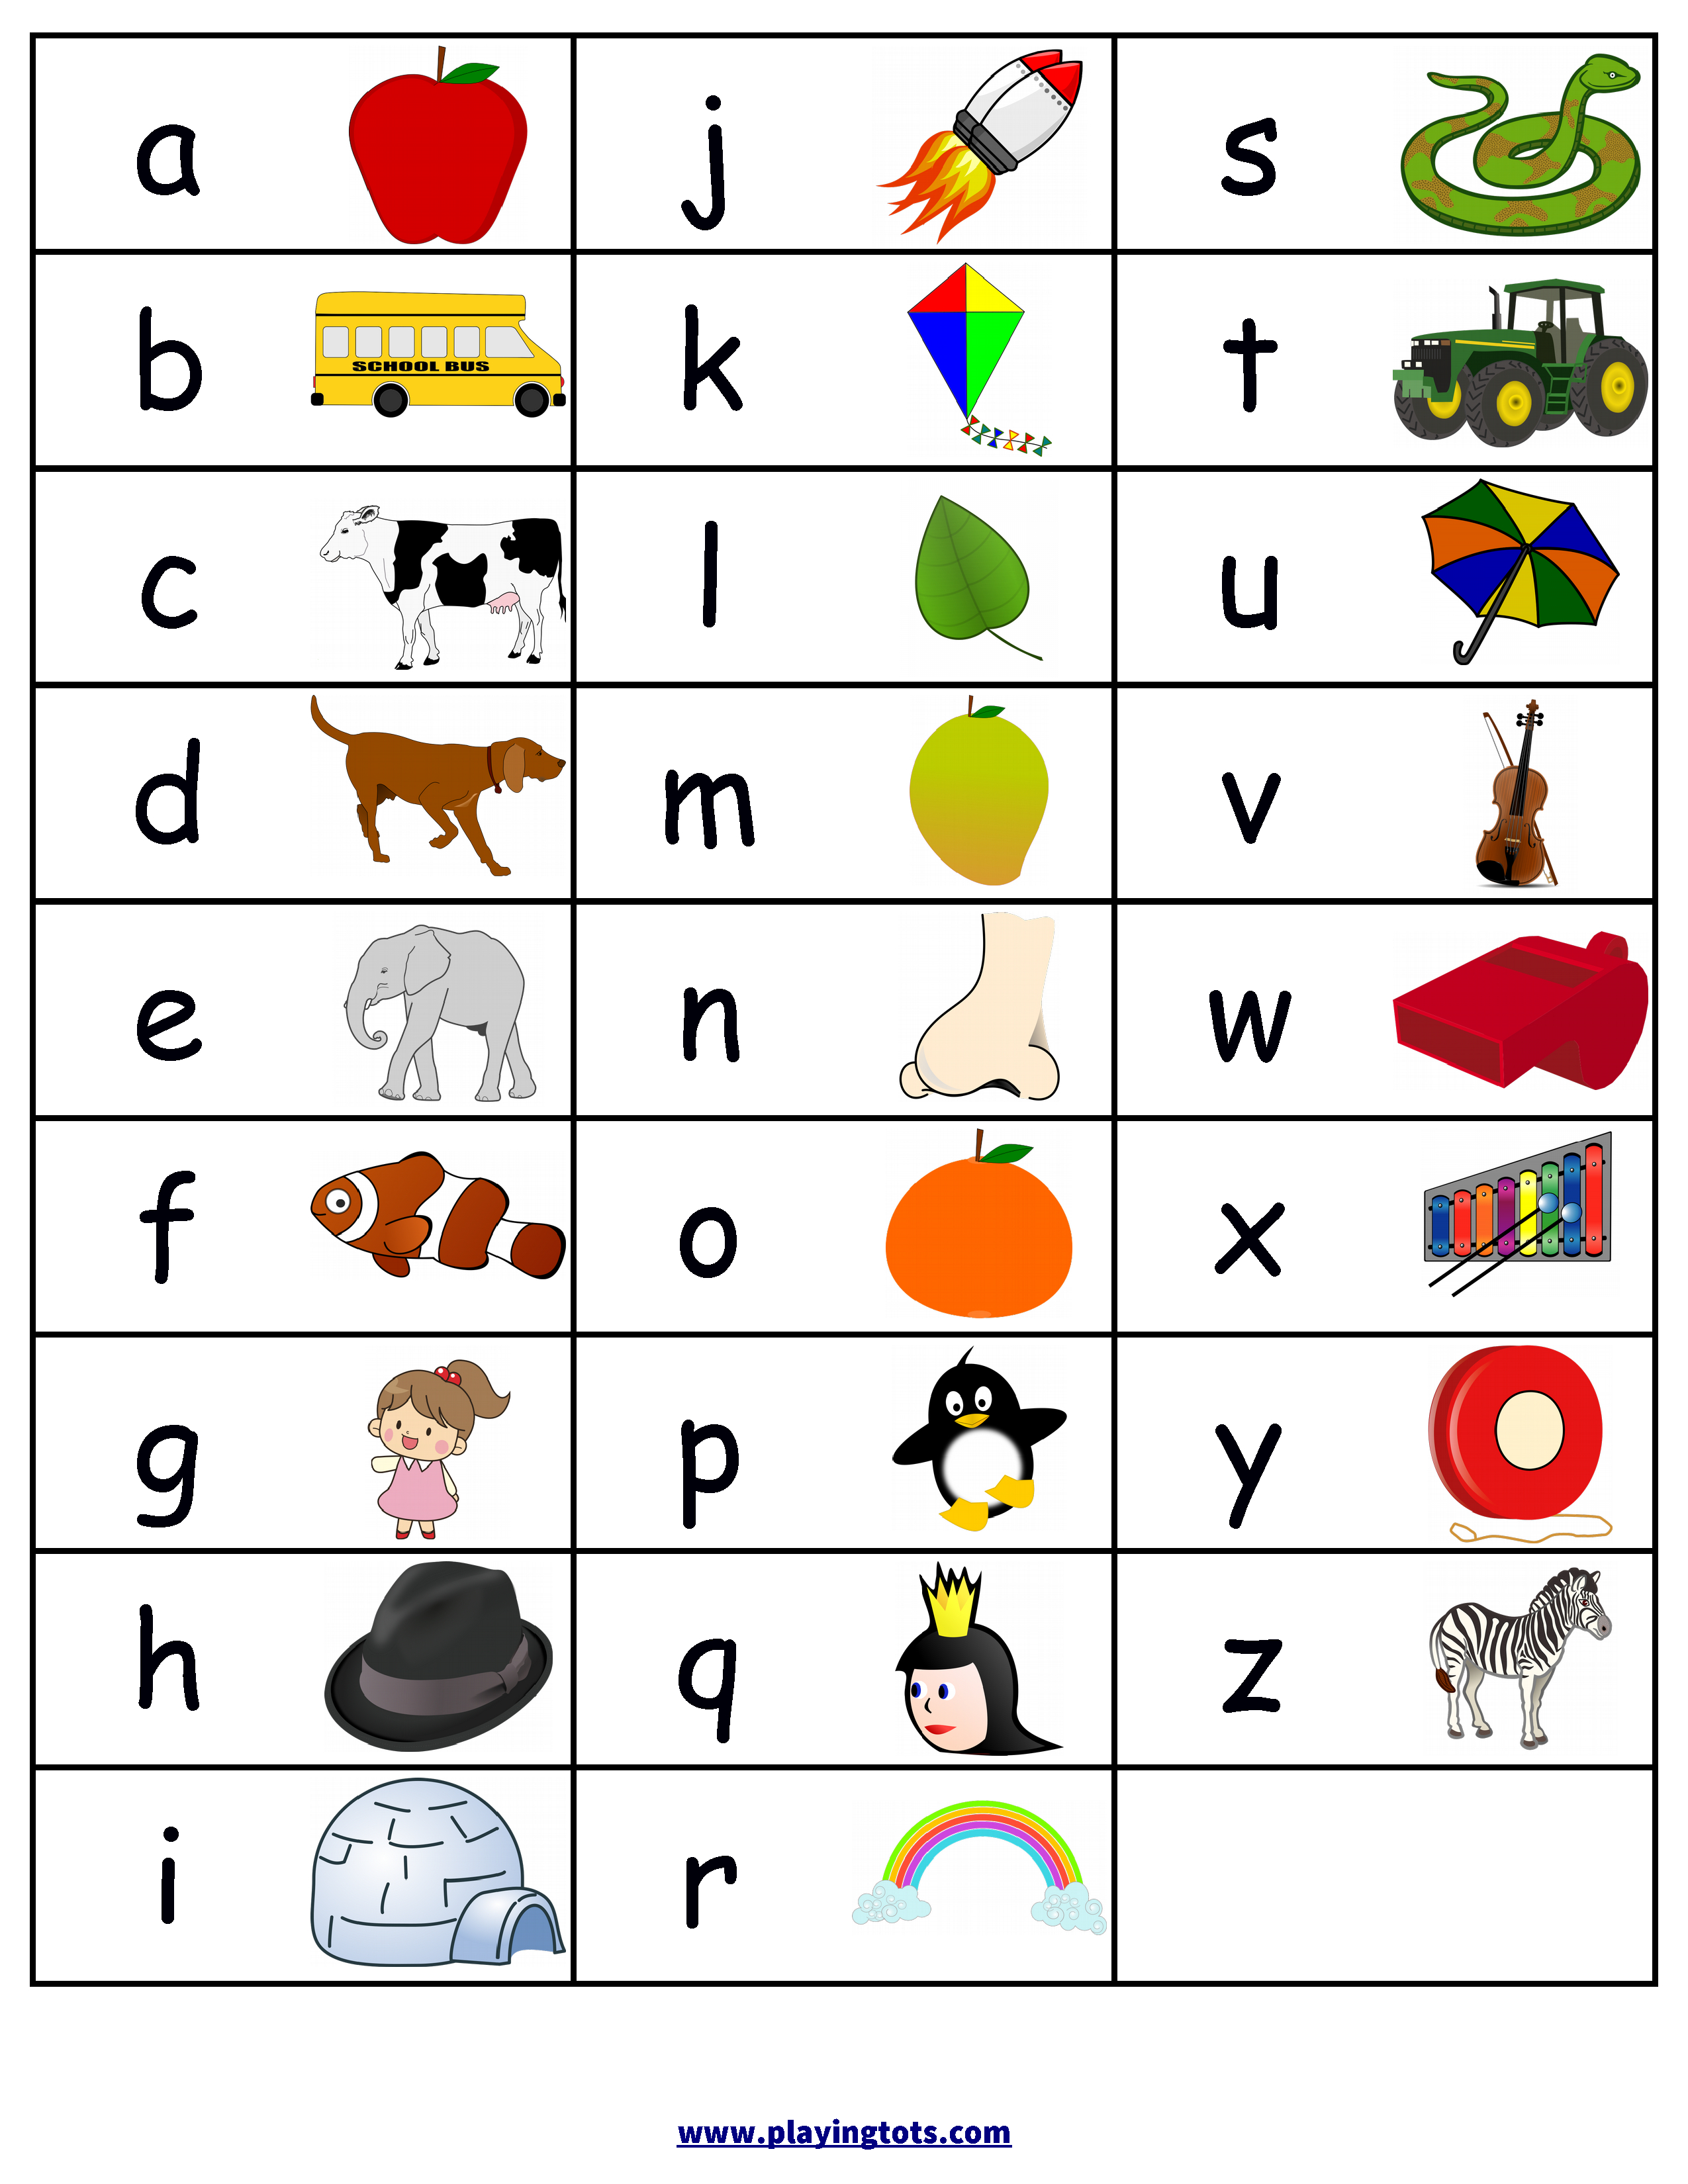 Free Printable Alphabets Chart With Pictures | Baby Bedroom - Free Printable Alphabet Chart